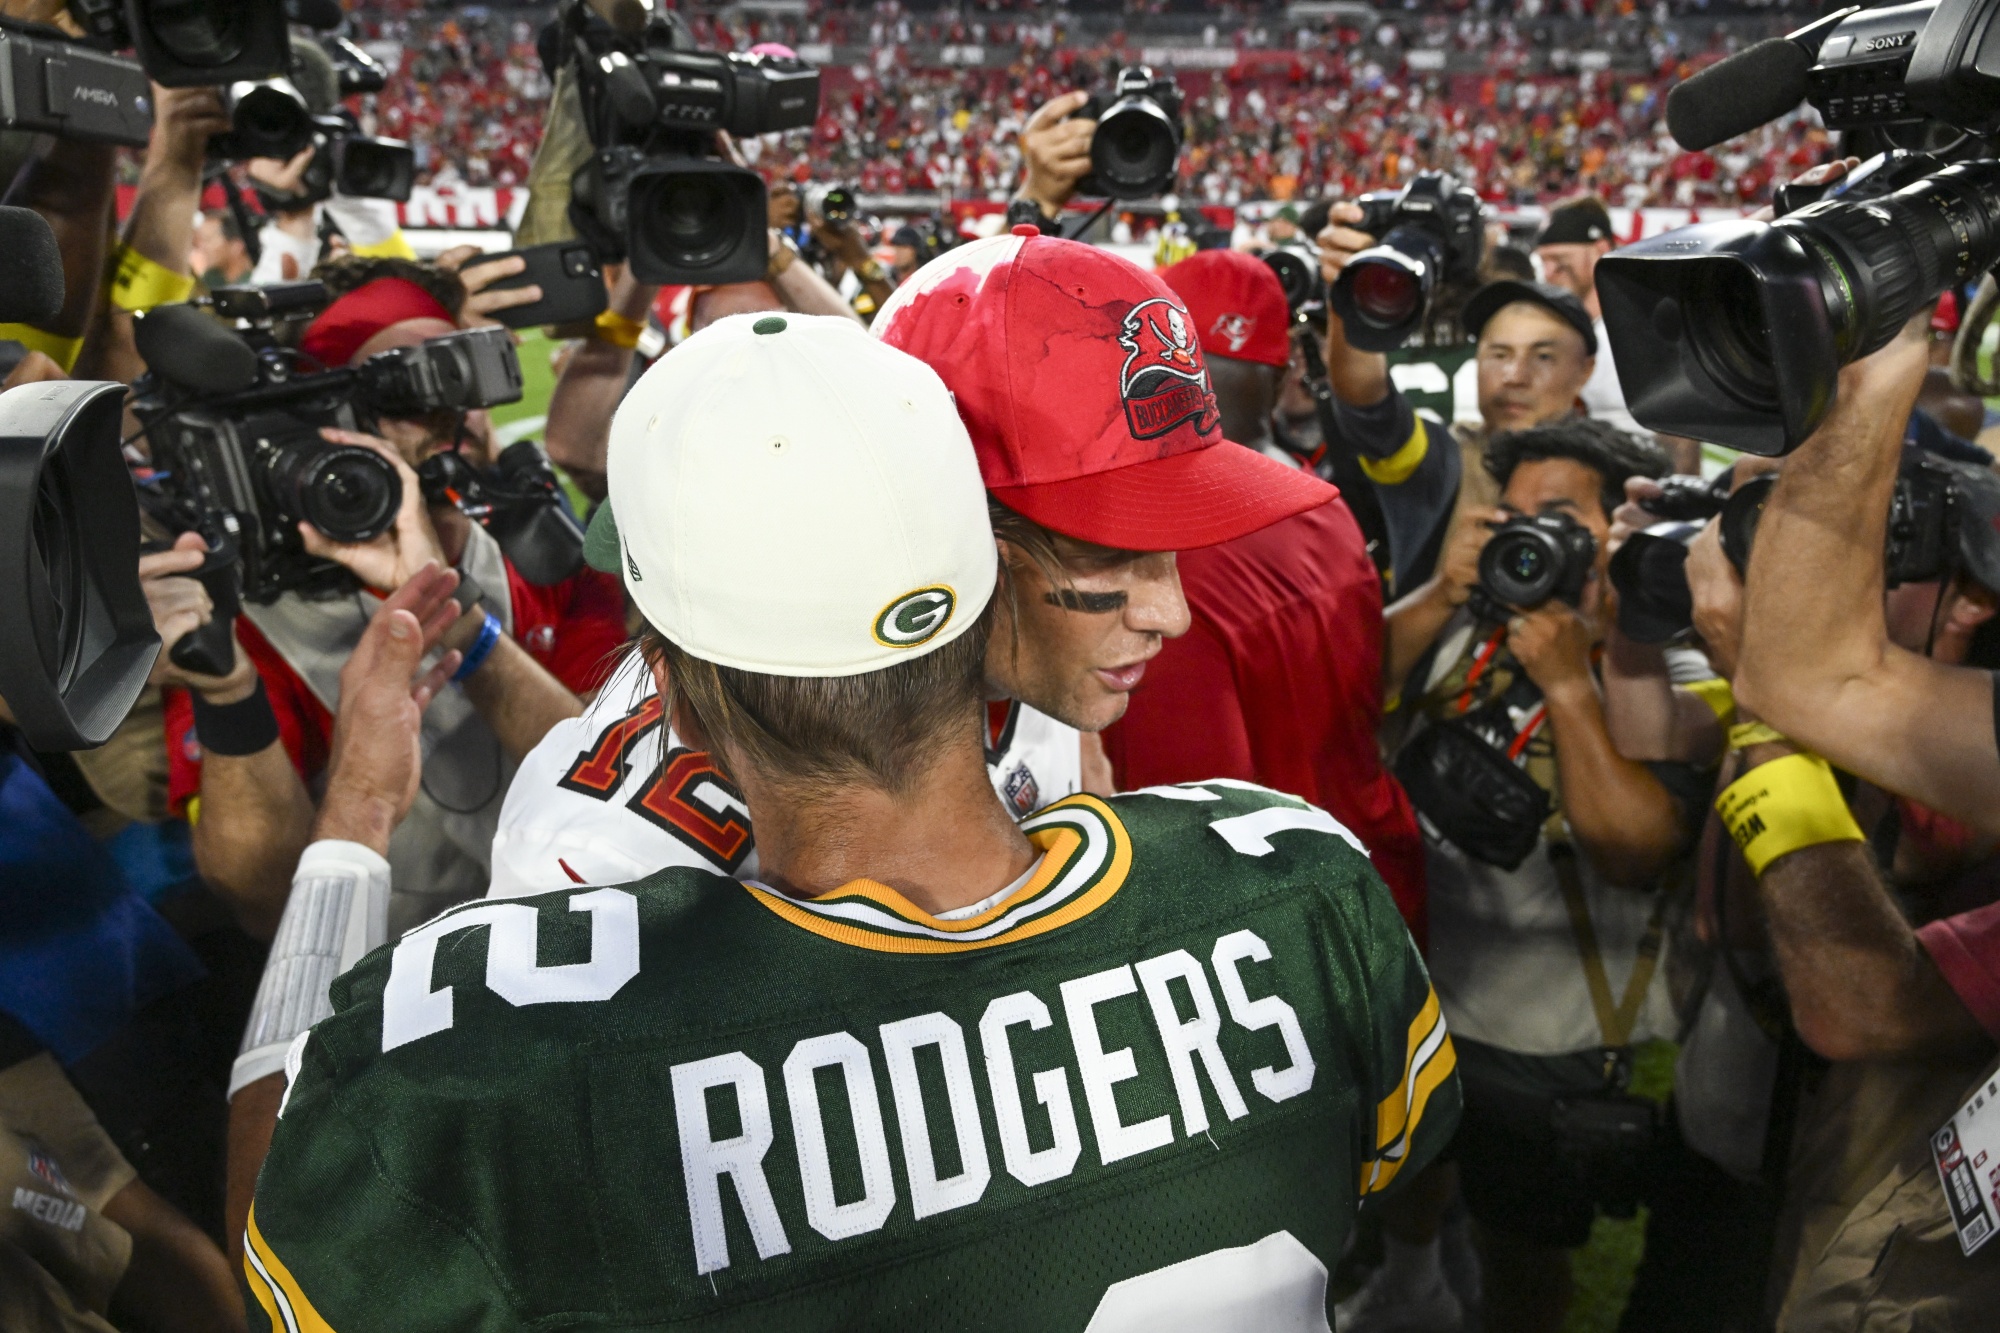 Rodgers Throws for 2 TDs, Packers Hold Off Brady, Bucs 14-12 - Bloomberg